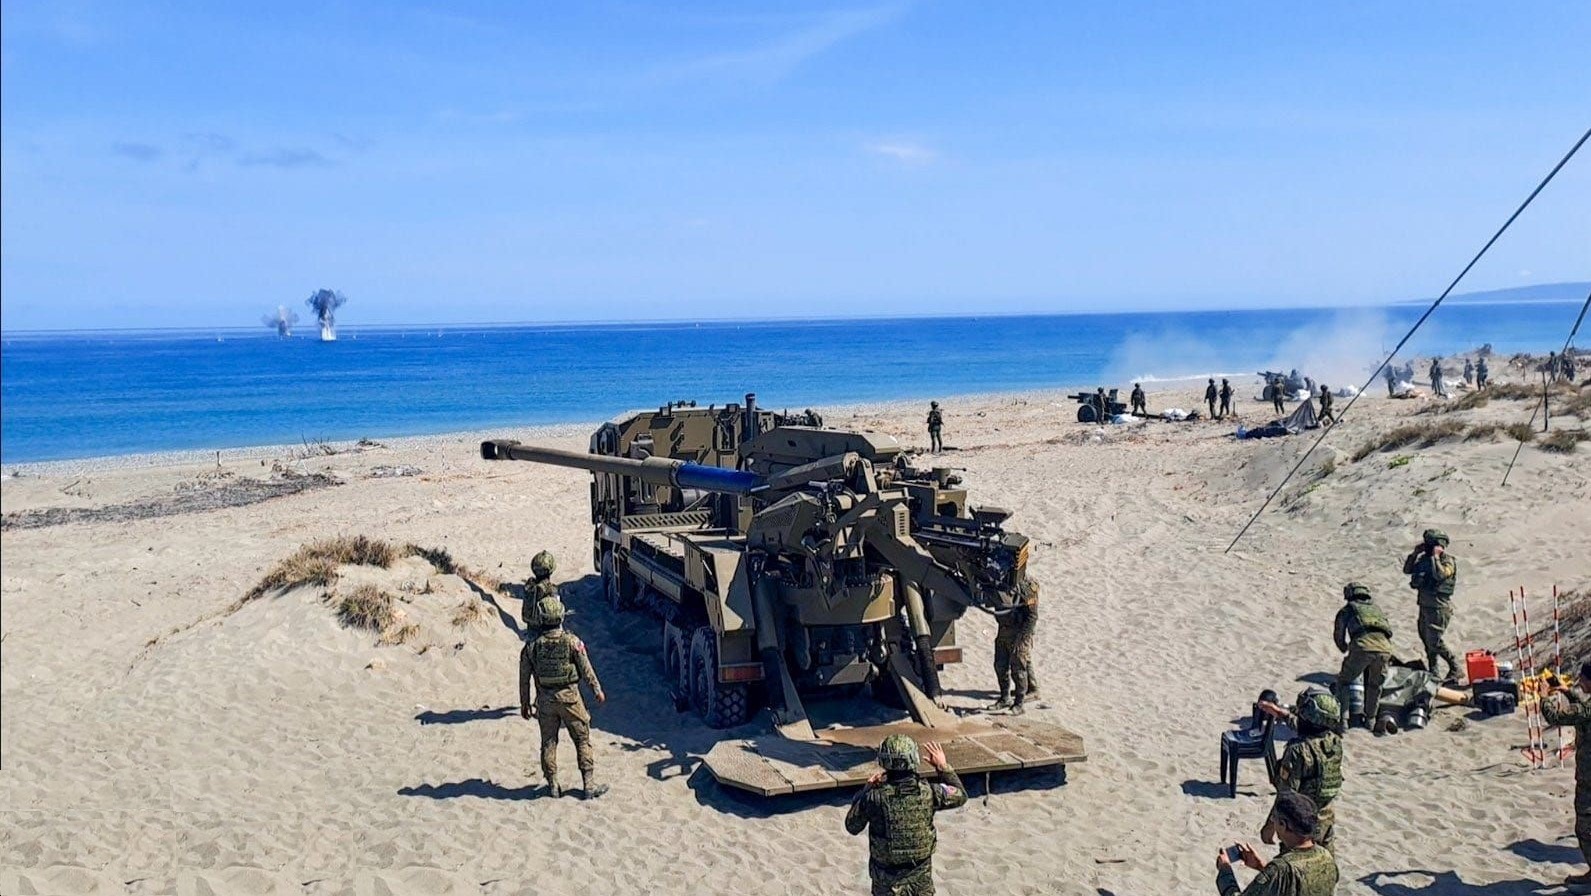 The howitzer platoon of the 3rd Self-Propelled Battery, 10th Field Artillery Battalion (10FAB) utilizing the ATMOS 2000 self-propelled gun fires at an off-shore target during the Counter-Landing live fire drill at the Sand Dunes, La Paz, Laoag City, Ilocos Norte on May 6, 2024.?